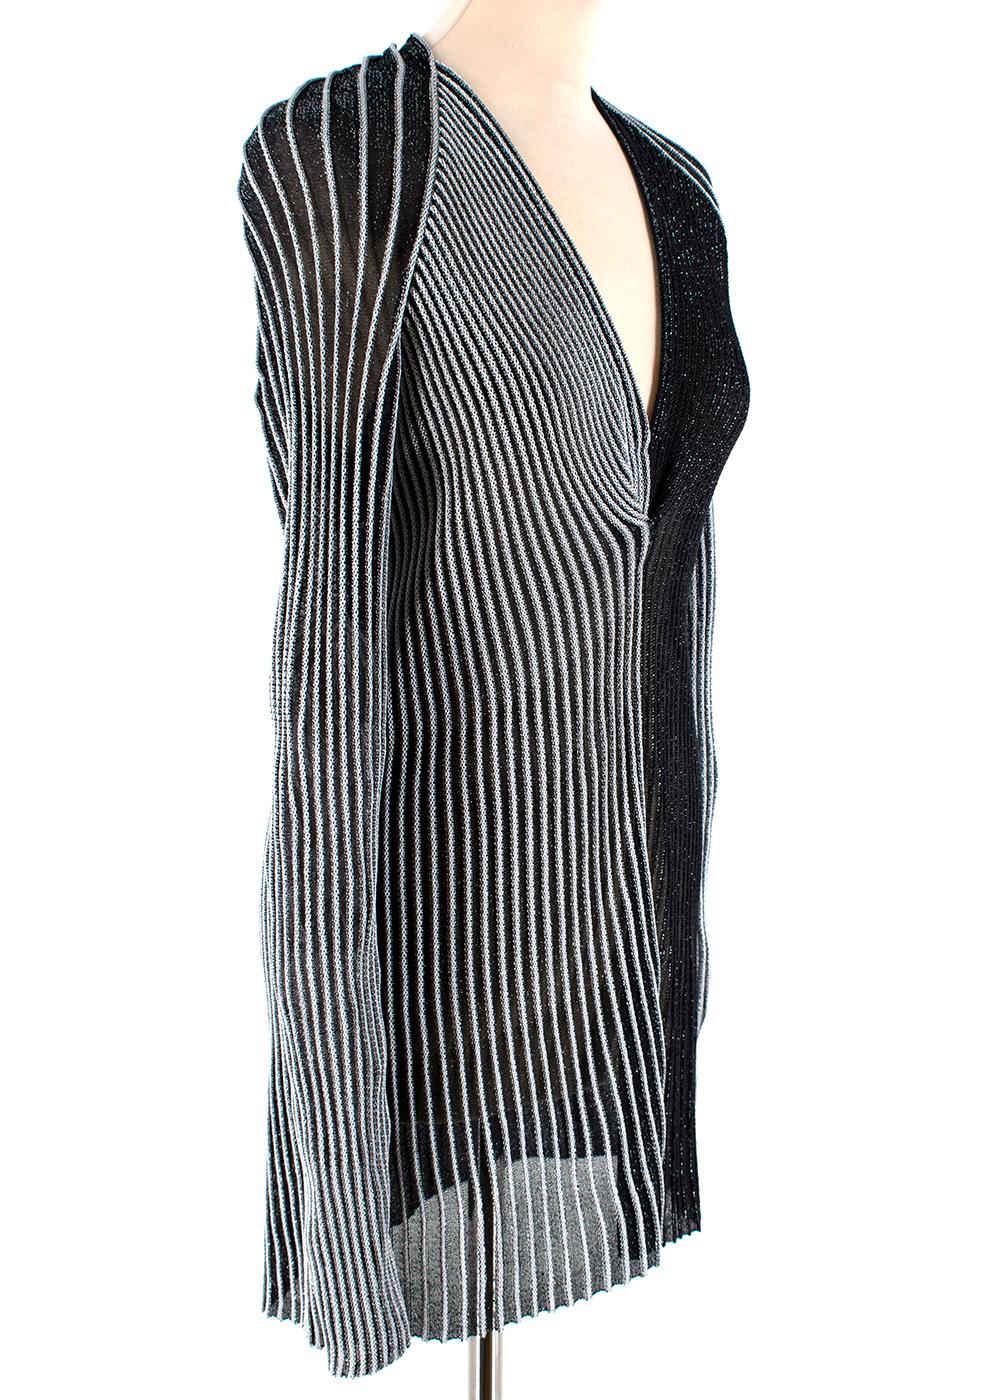 Proenza Schouler Metallic Striped Contrast Ribbed-Knit Top

- Silver/Black metallic ribbed knitted top 
- Contrast stripe design 
- Fine knit 
- Plunge neckline 
- Pull on style 

Materials: 
76% Viscose, 24% Polyester 

Dry Clean Only 

Made in